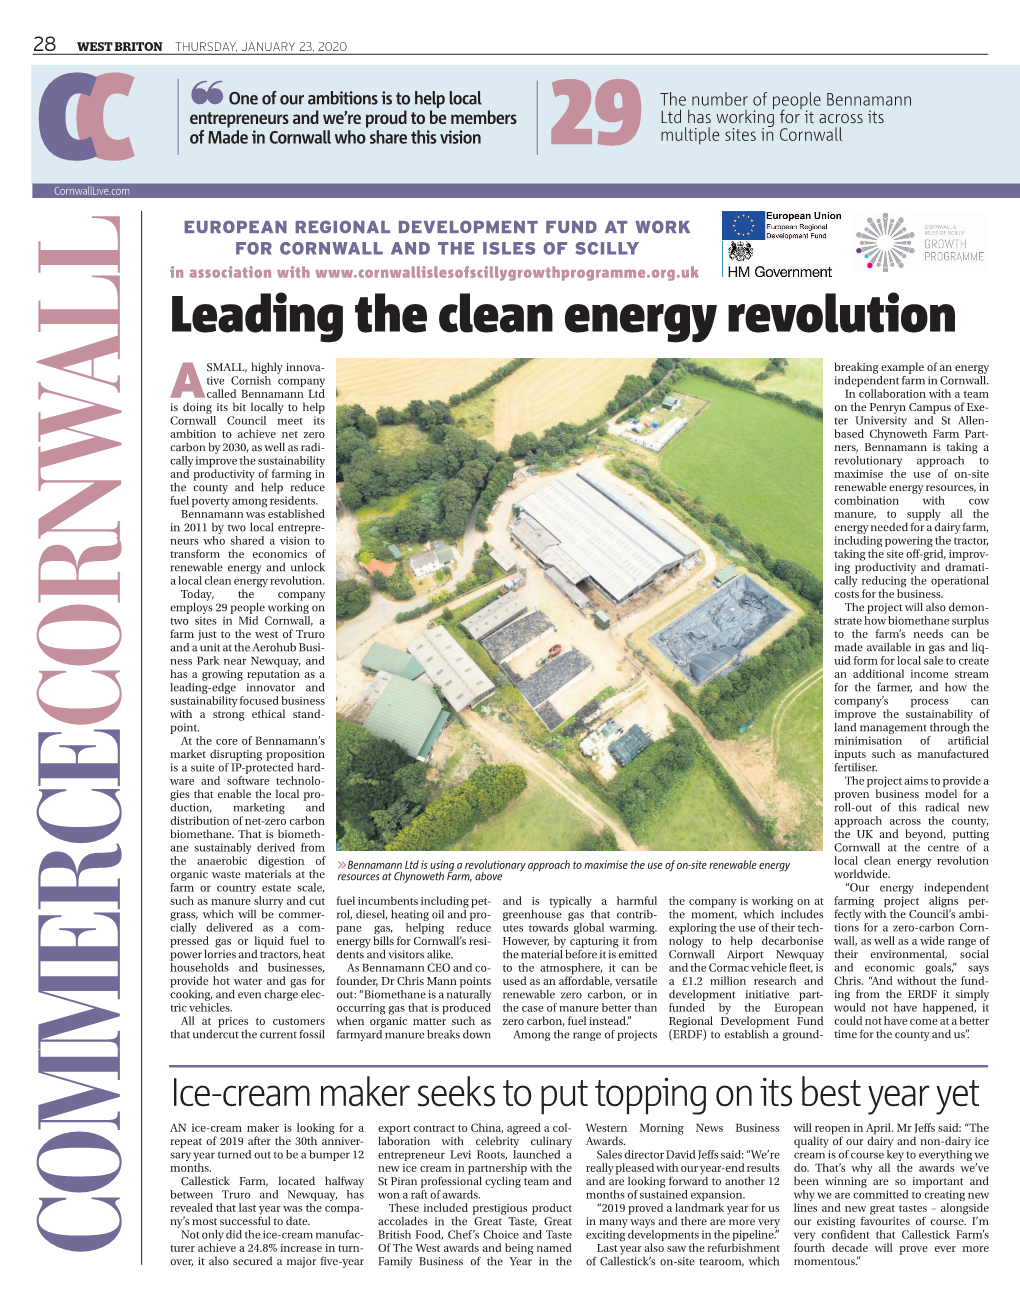 Leading the Clean Energy Revolution